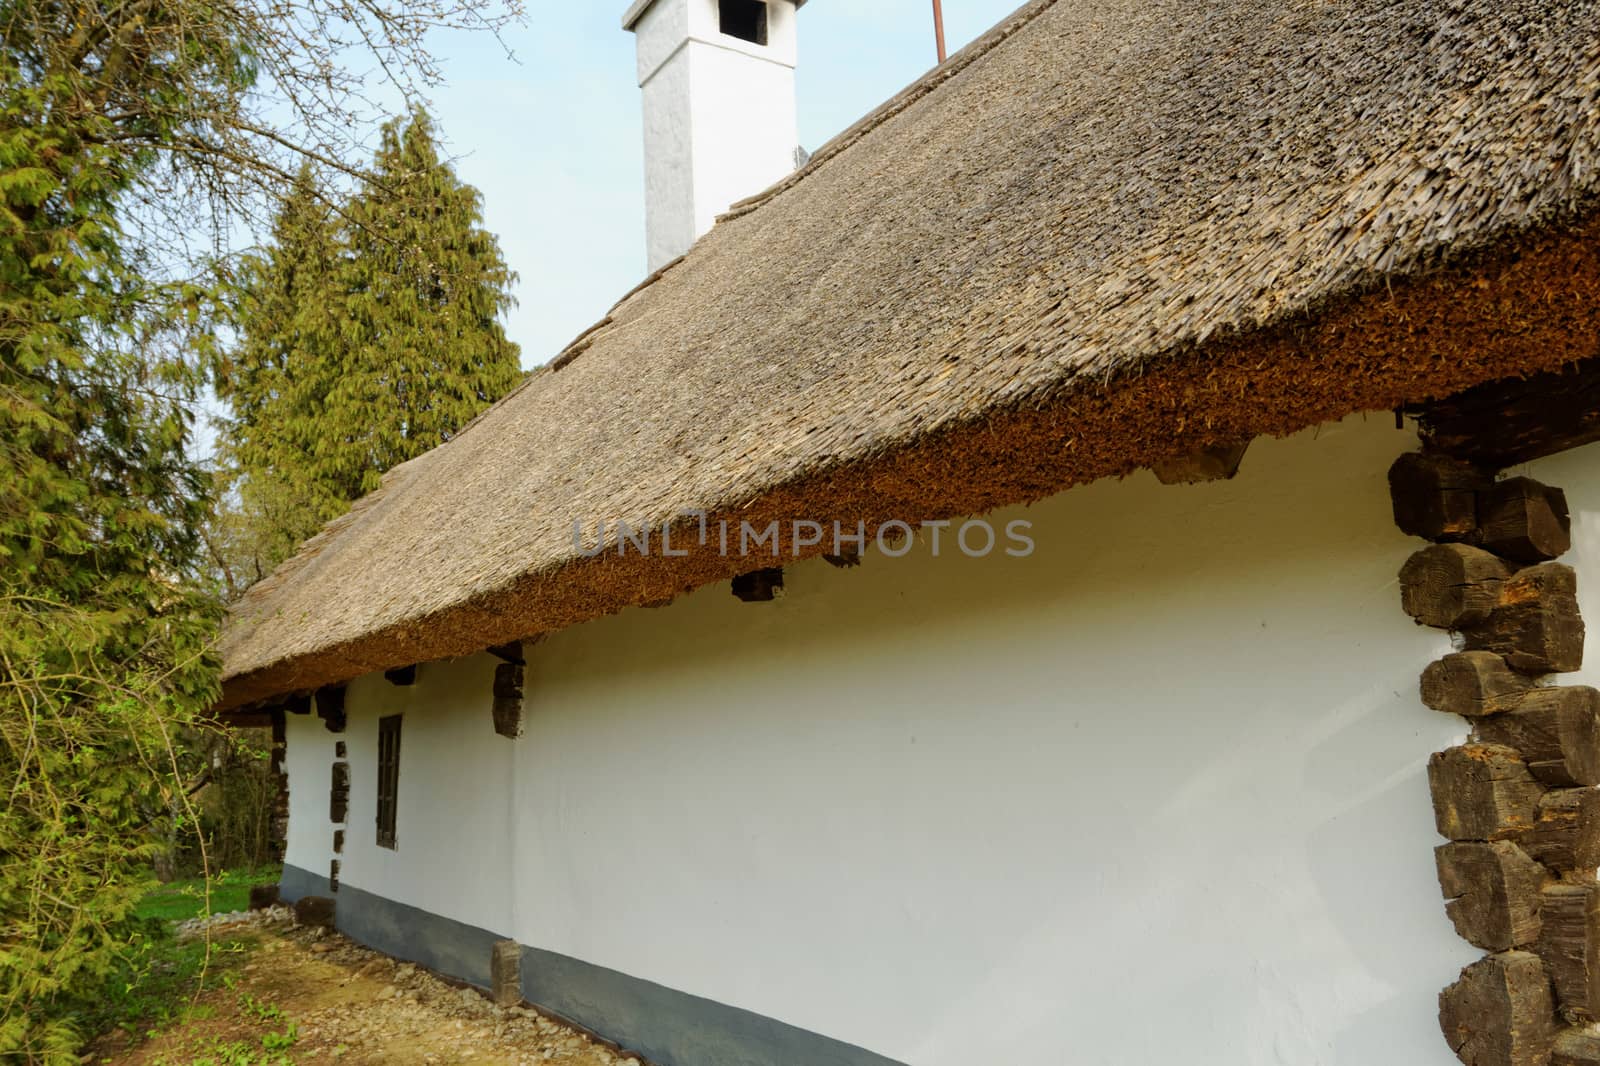 Old farmhouse with a thatched roof